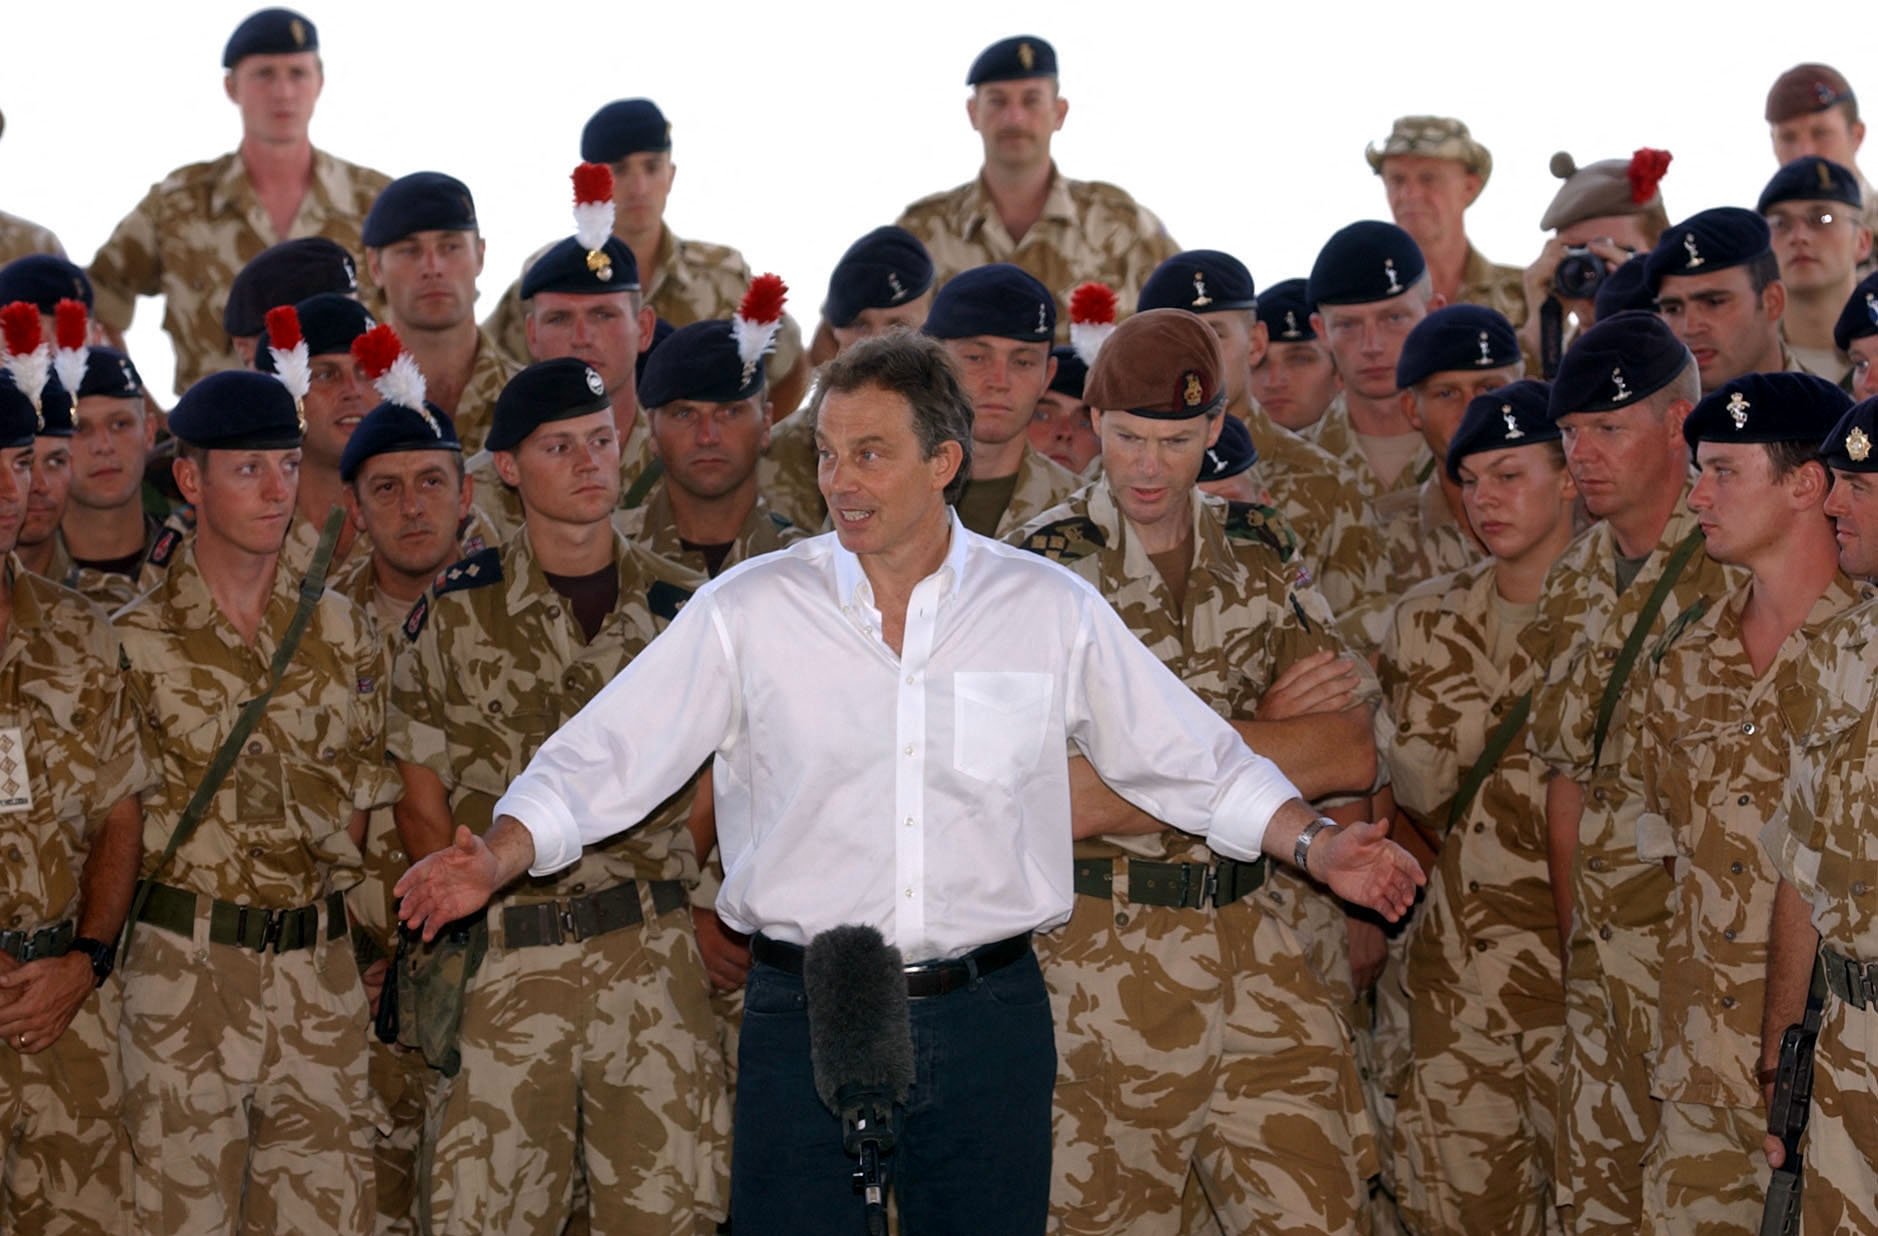 British Prime Minister Tony Blair addresses troops in Basra, Iraq, 29 May 2003.